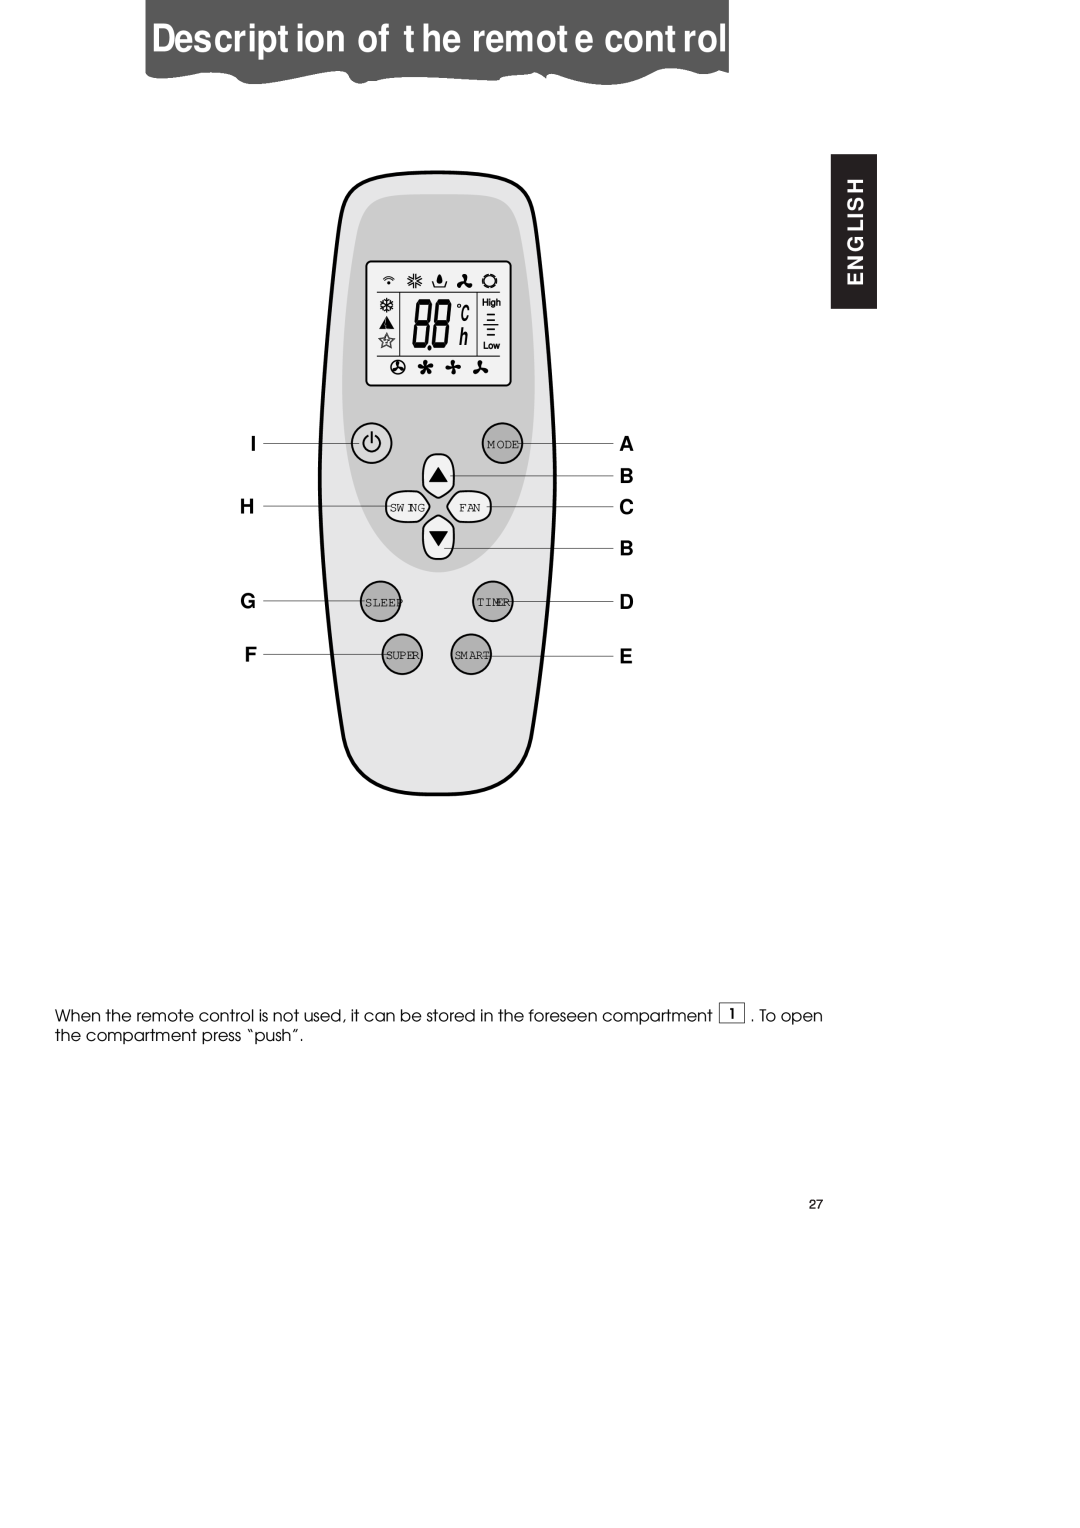 DeLonghi PAC70 ECO manual Description of the remote control, English, A B C B, M Ode, Sw Ing, Sleep, Timer, Super, Sm Art 